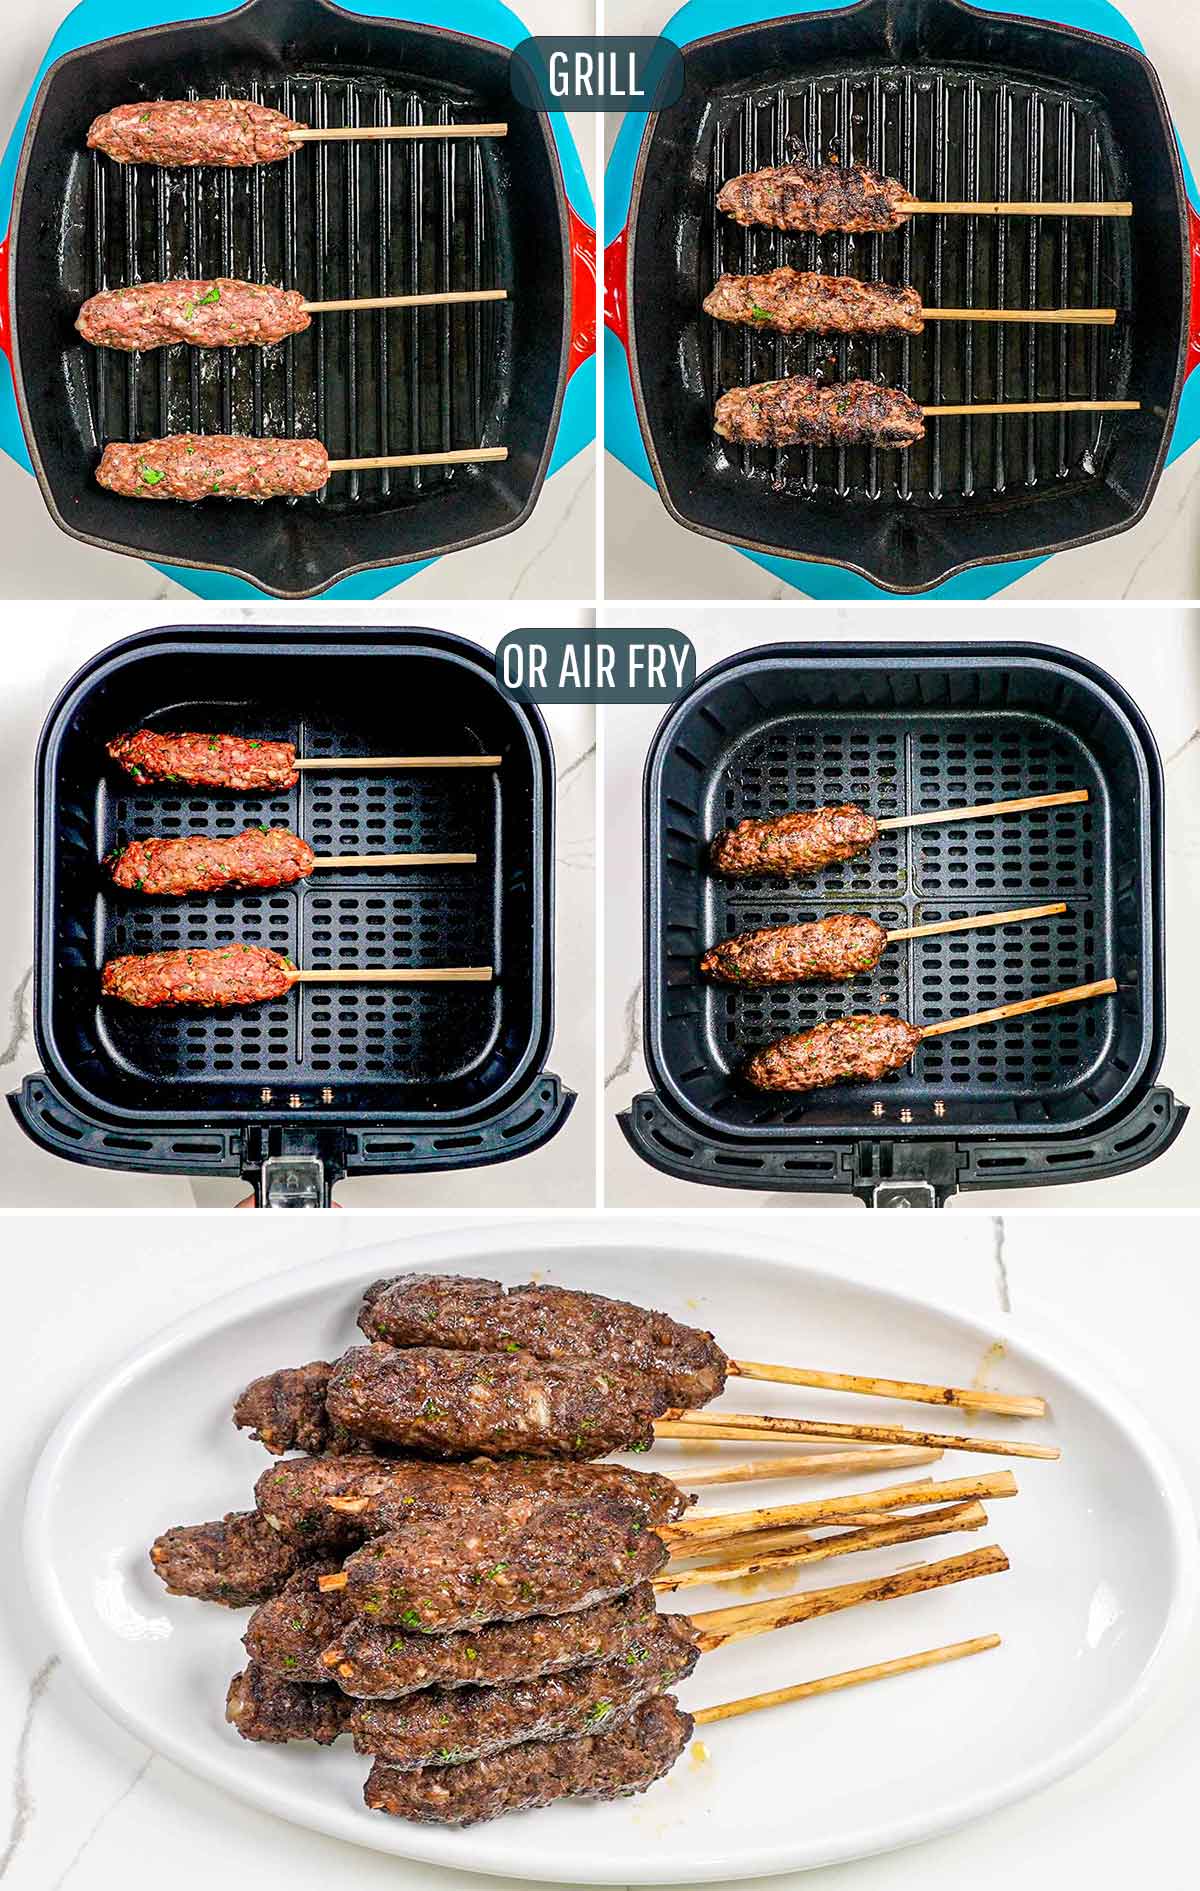 process shots showing how to grill or air fry koftas.